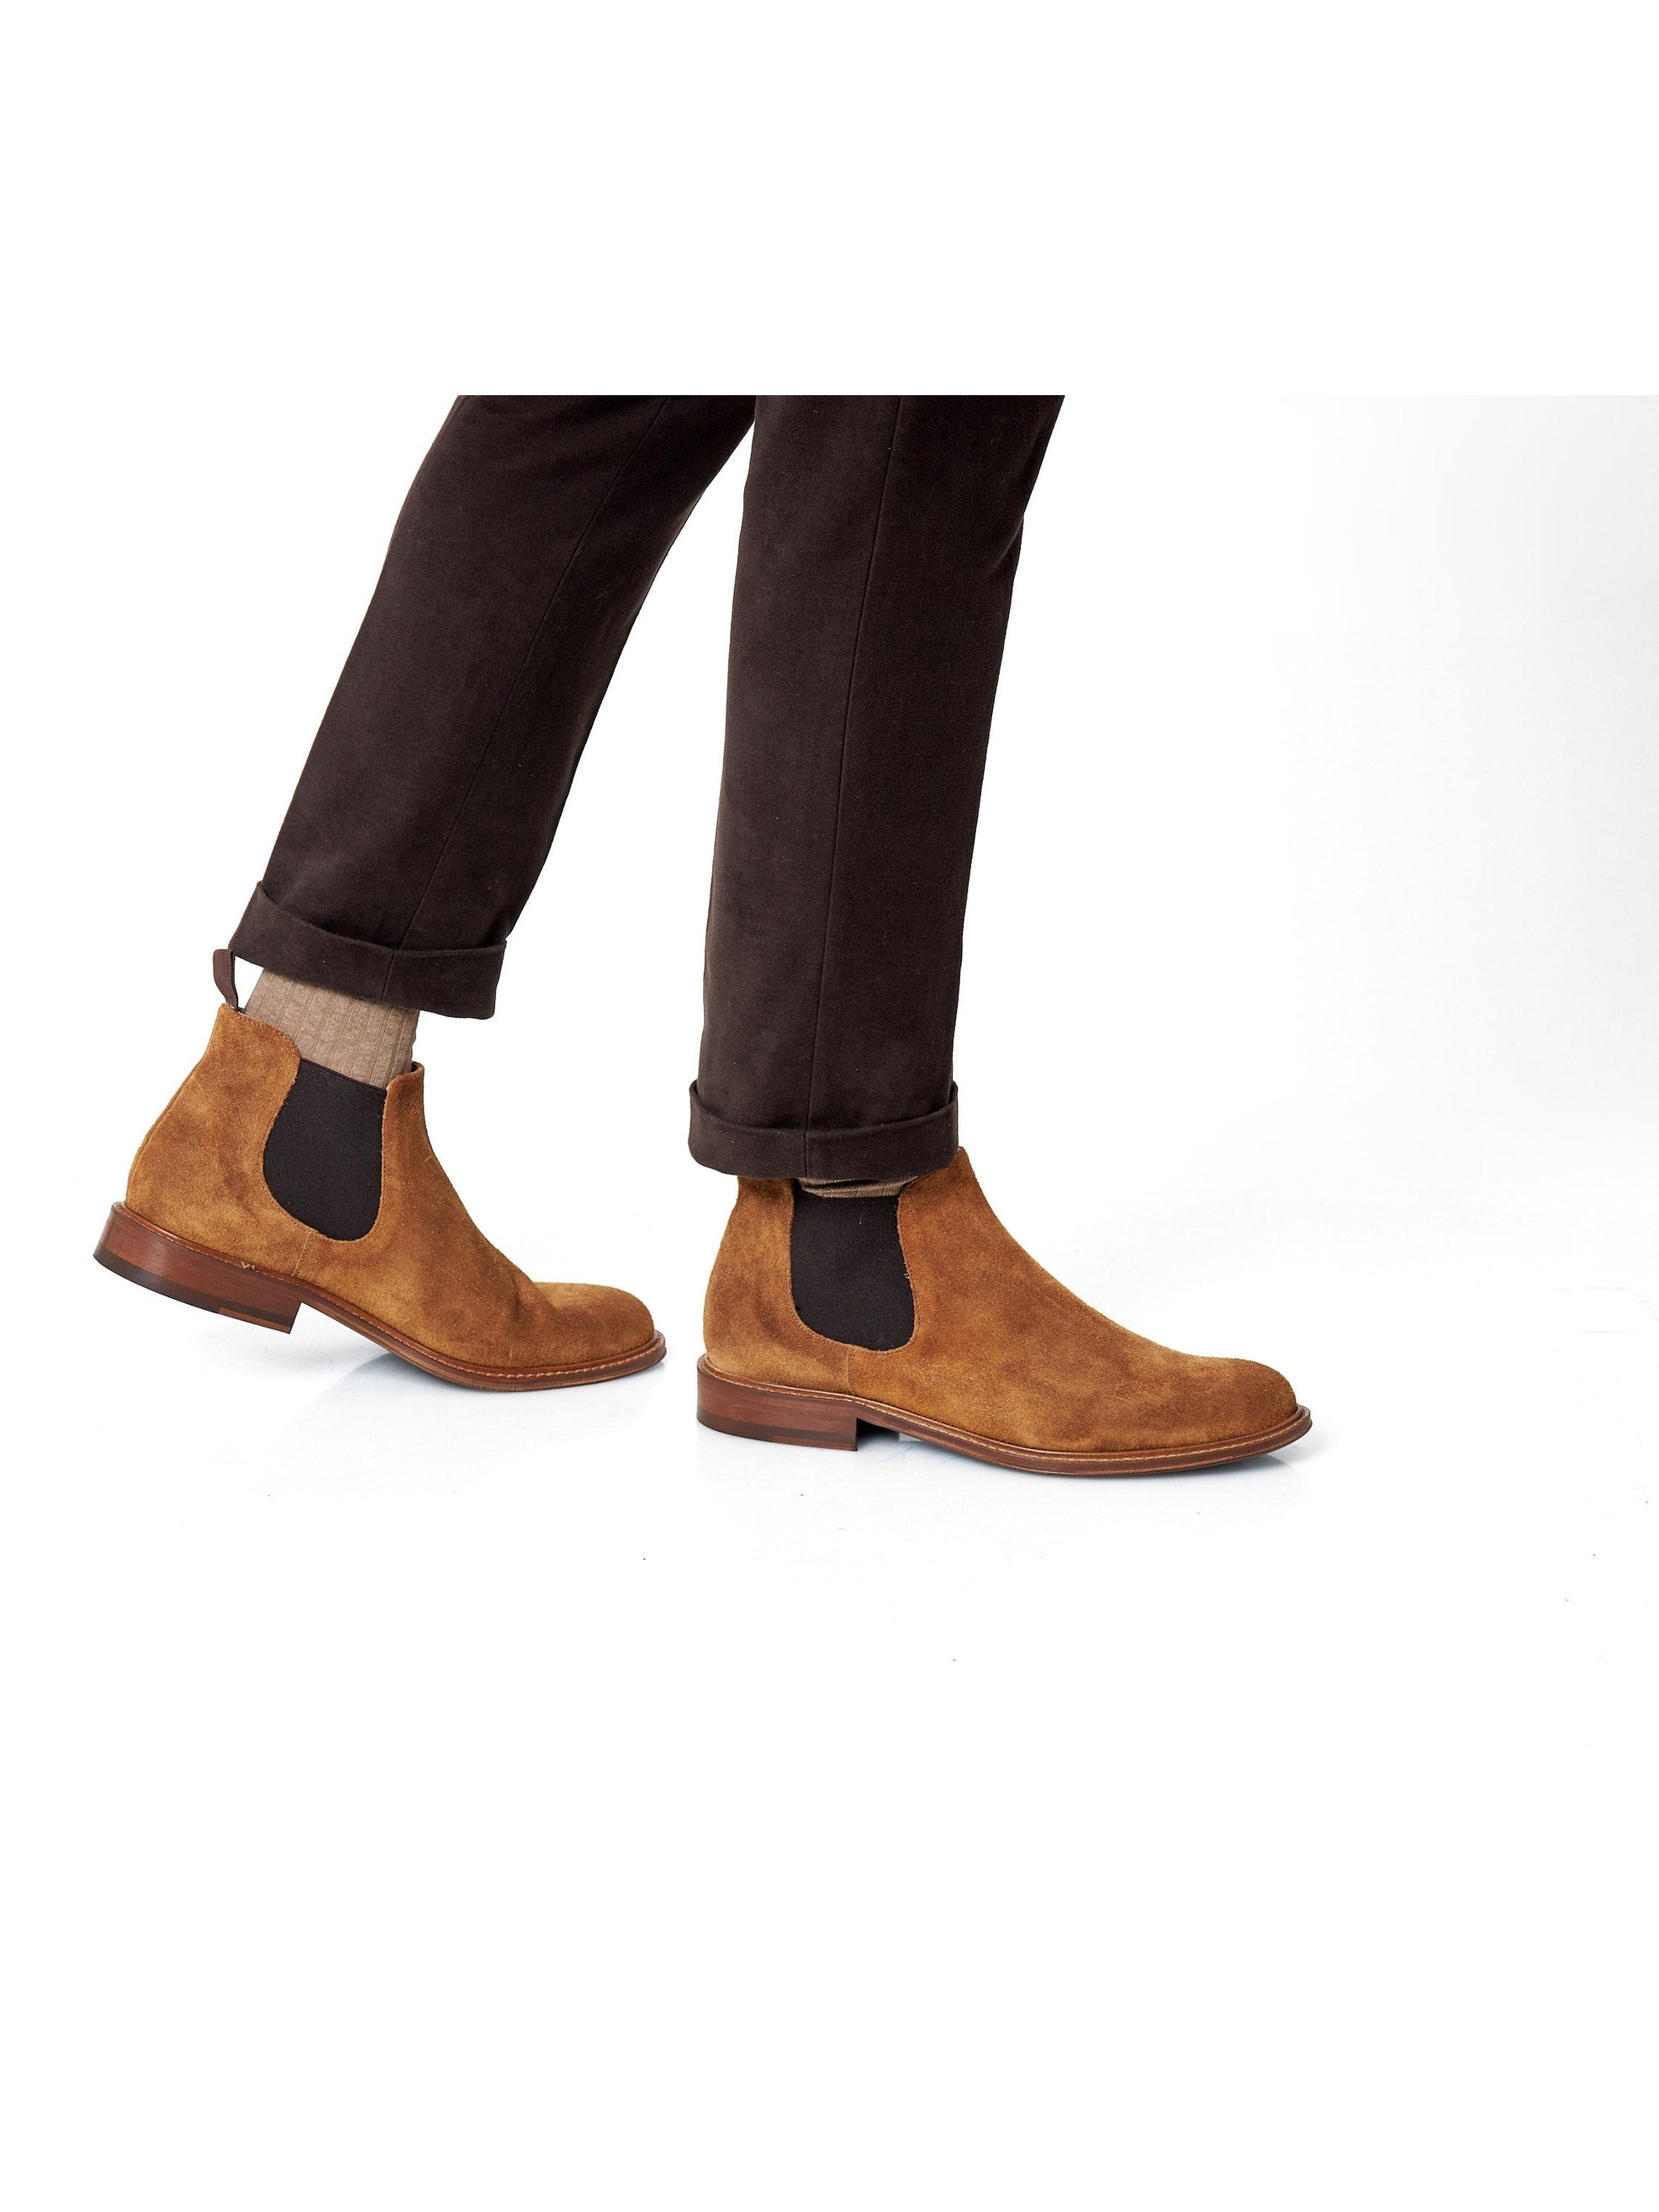 TAN ITALIAN SUEDE LEATHER CHELSEA BOOTS